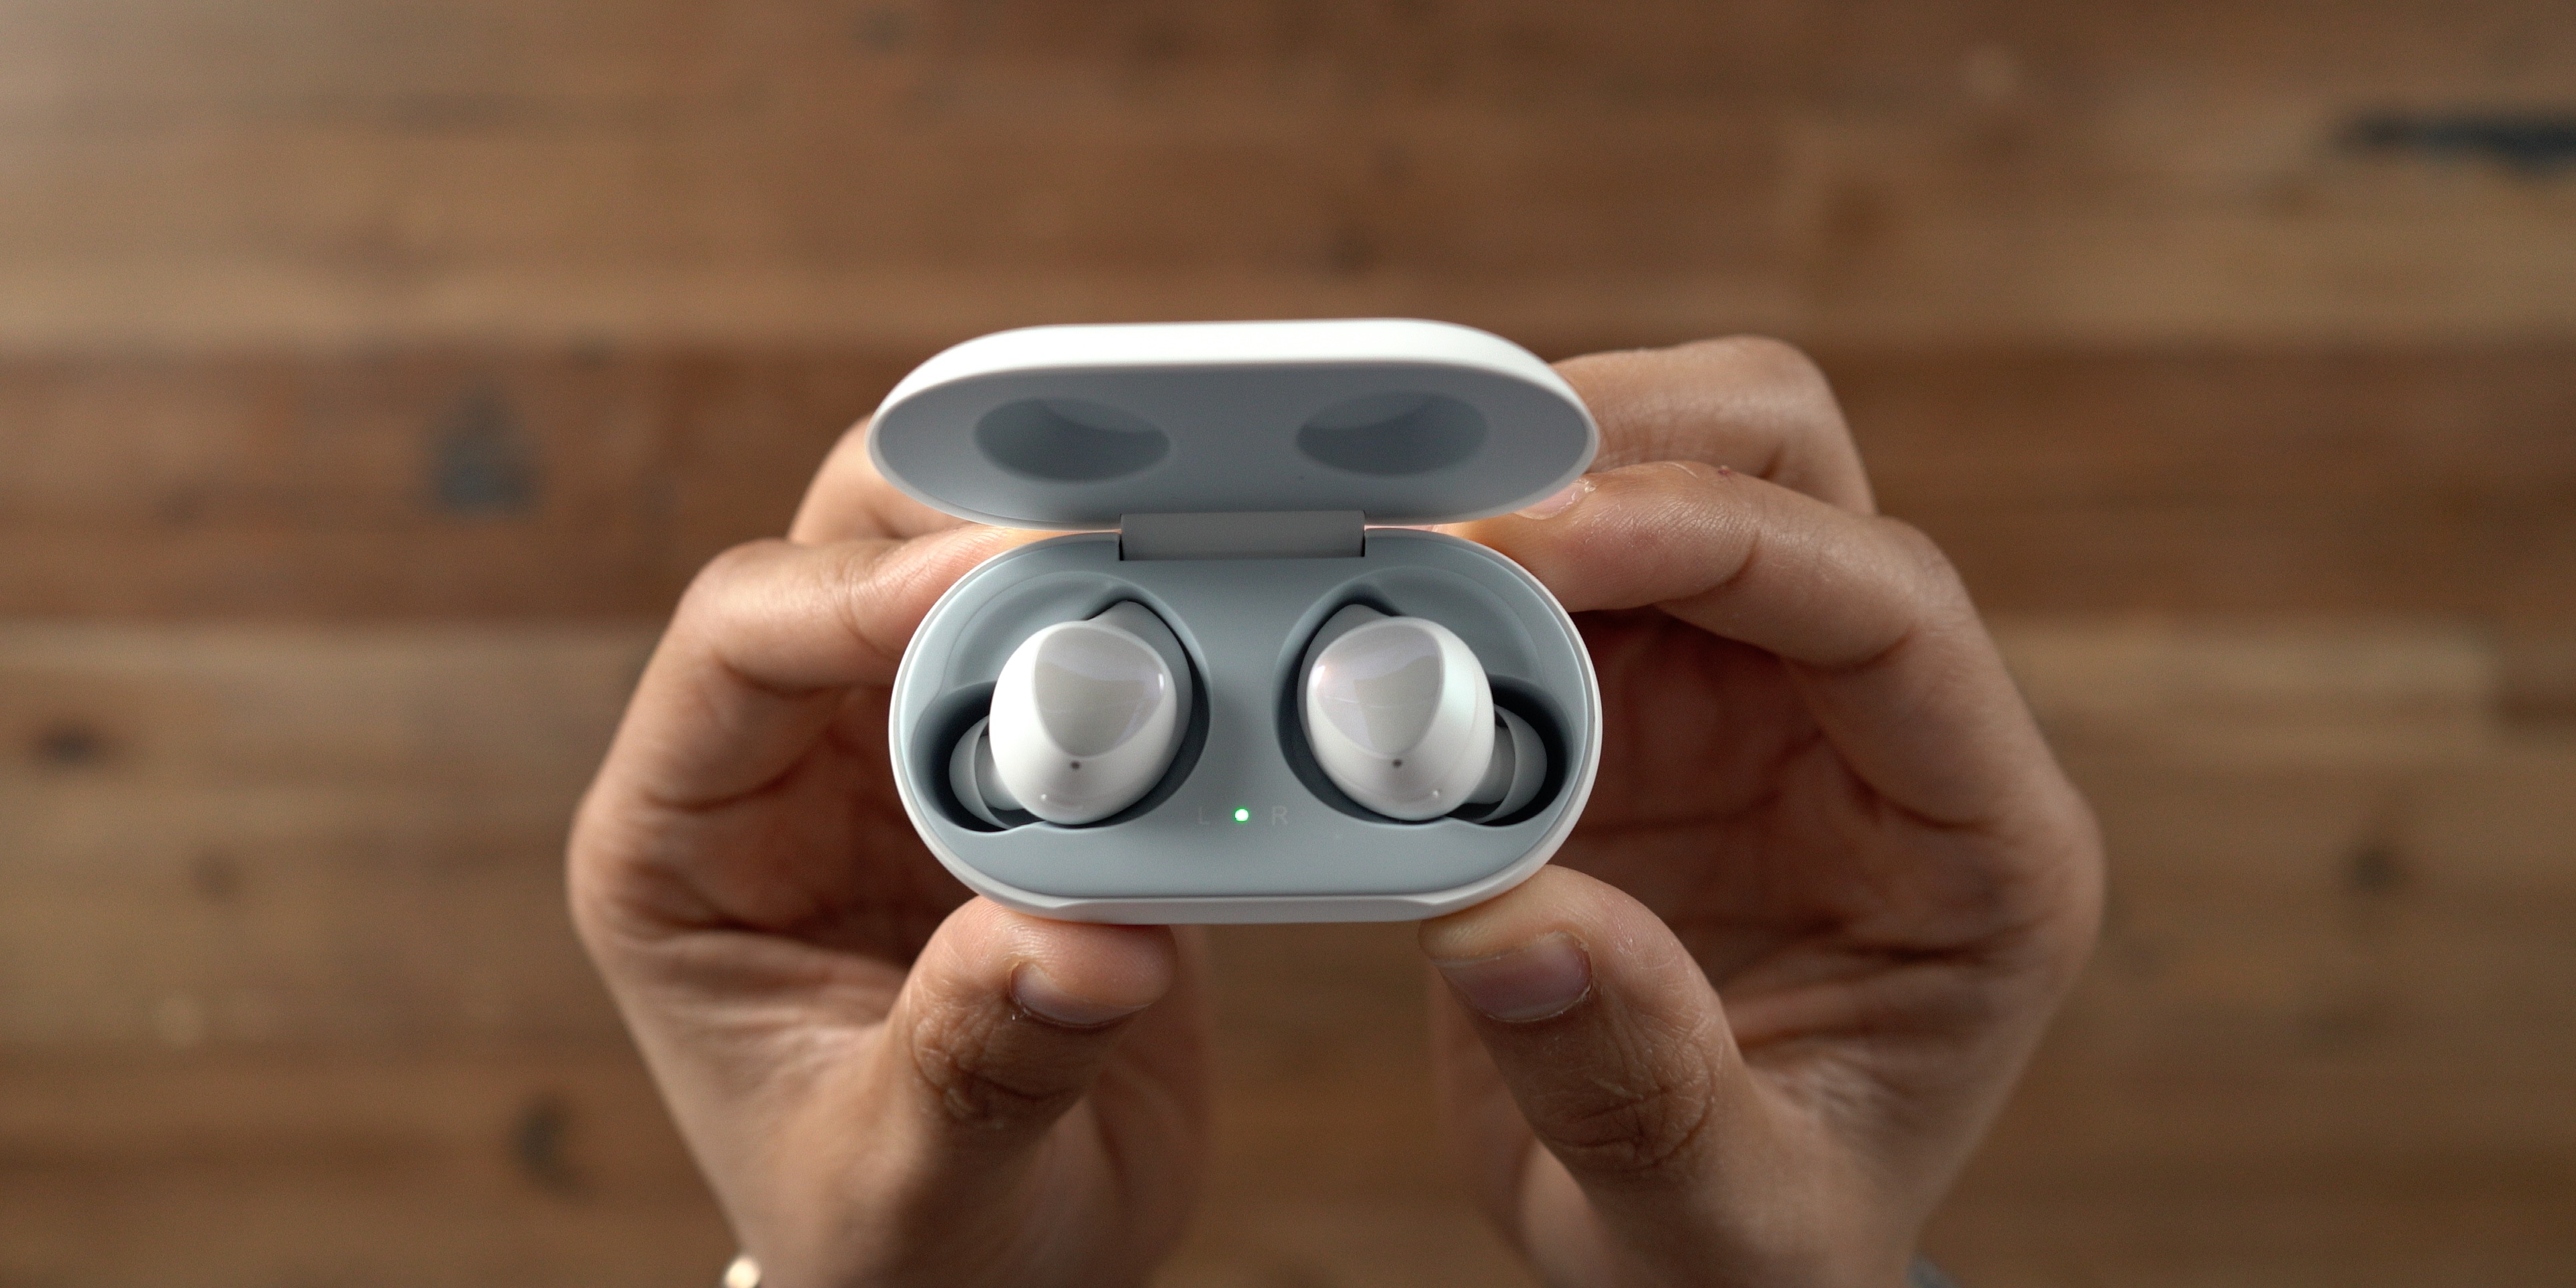 Samsung Galaxy Buds Charging Case Up Close